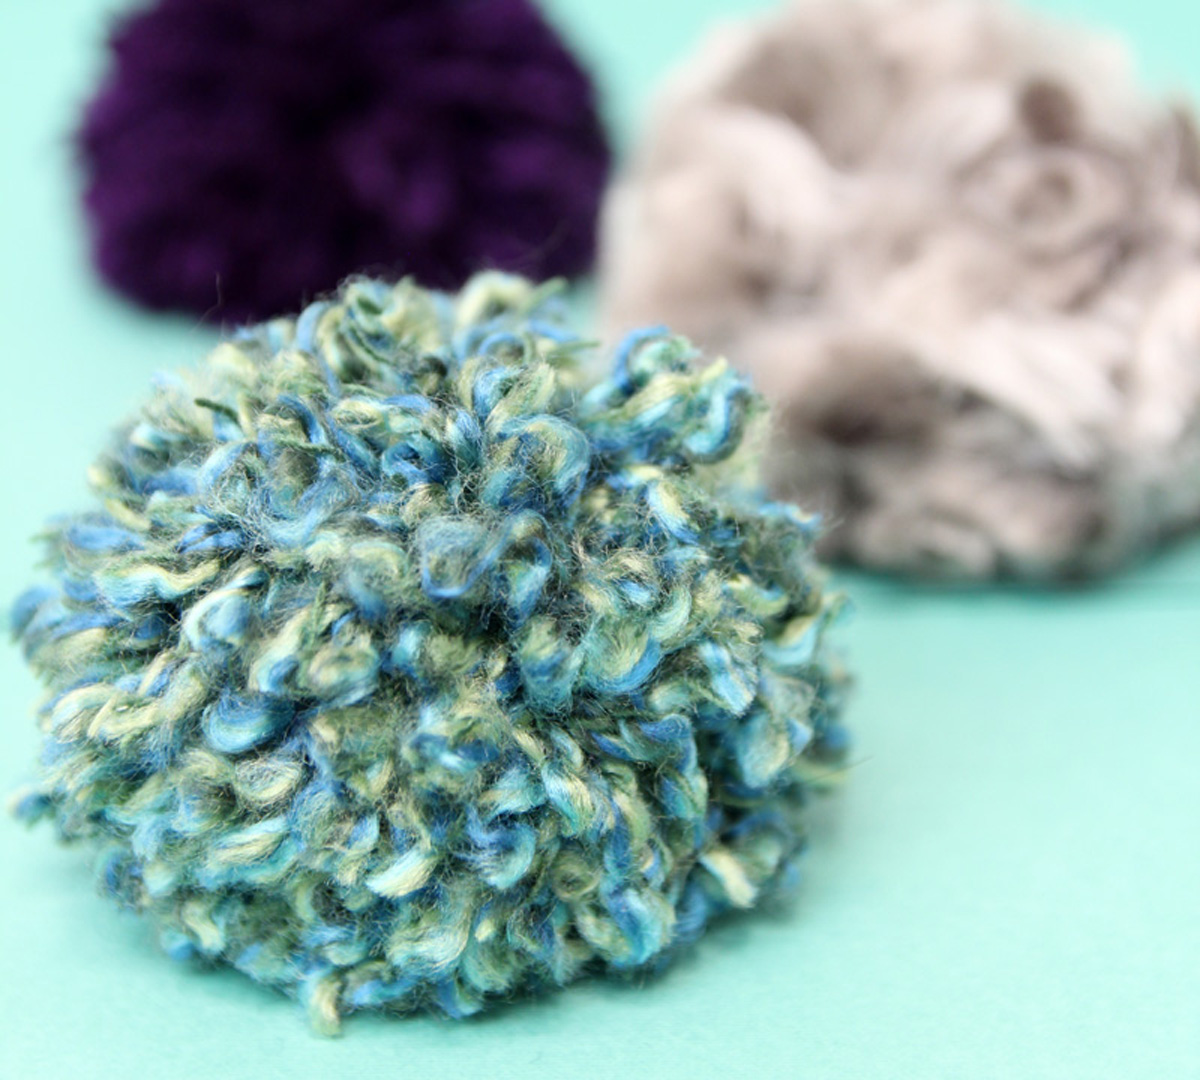 Two It Yourself: How to make pom poms from yarn